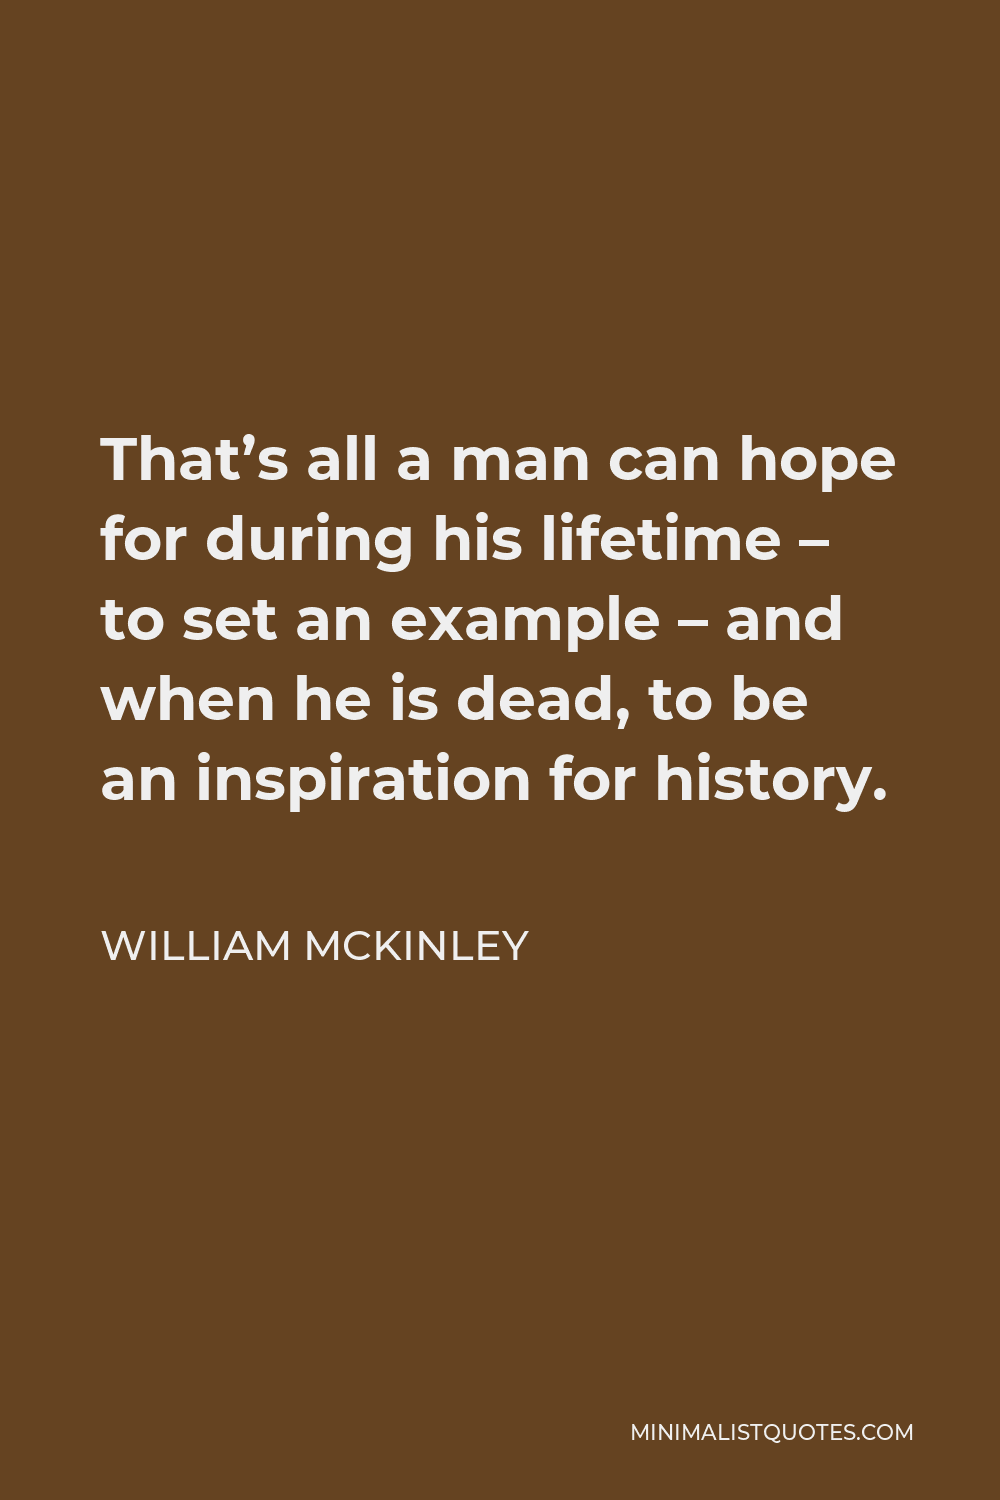 William McKinley Quote - That’s all a man can hope for during his lifetime – to set an example – and when he is dead, to be an inspiration for history.